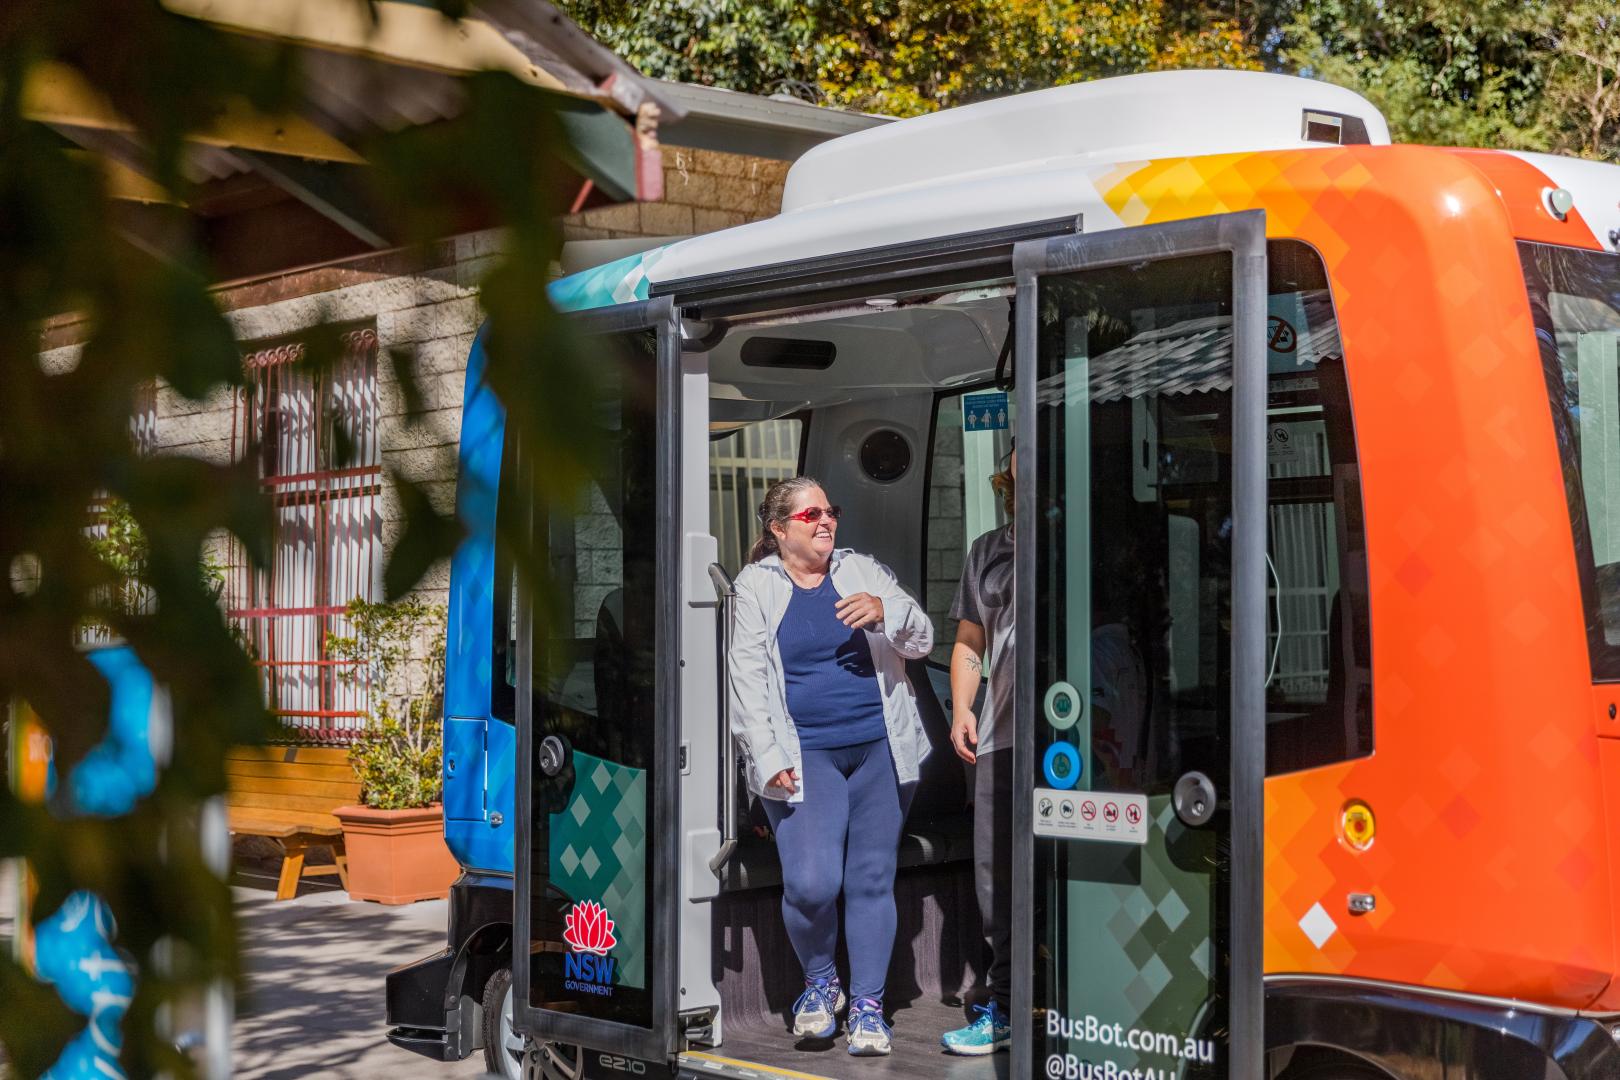 Community members are encouraged to ride the vehicle and leave feedback about their thoughts on future transport.